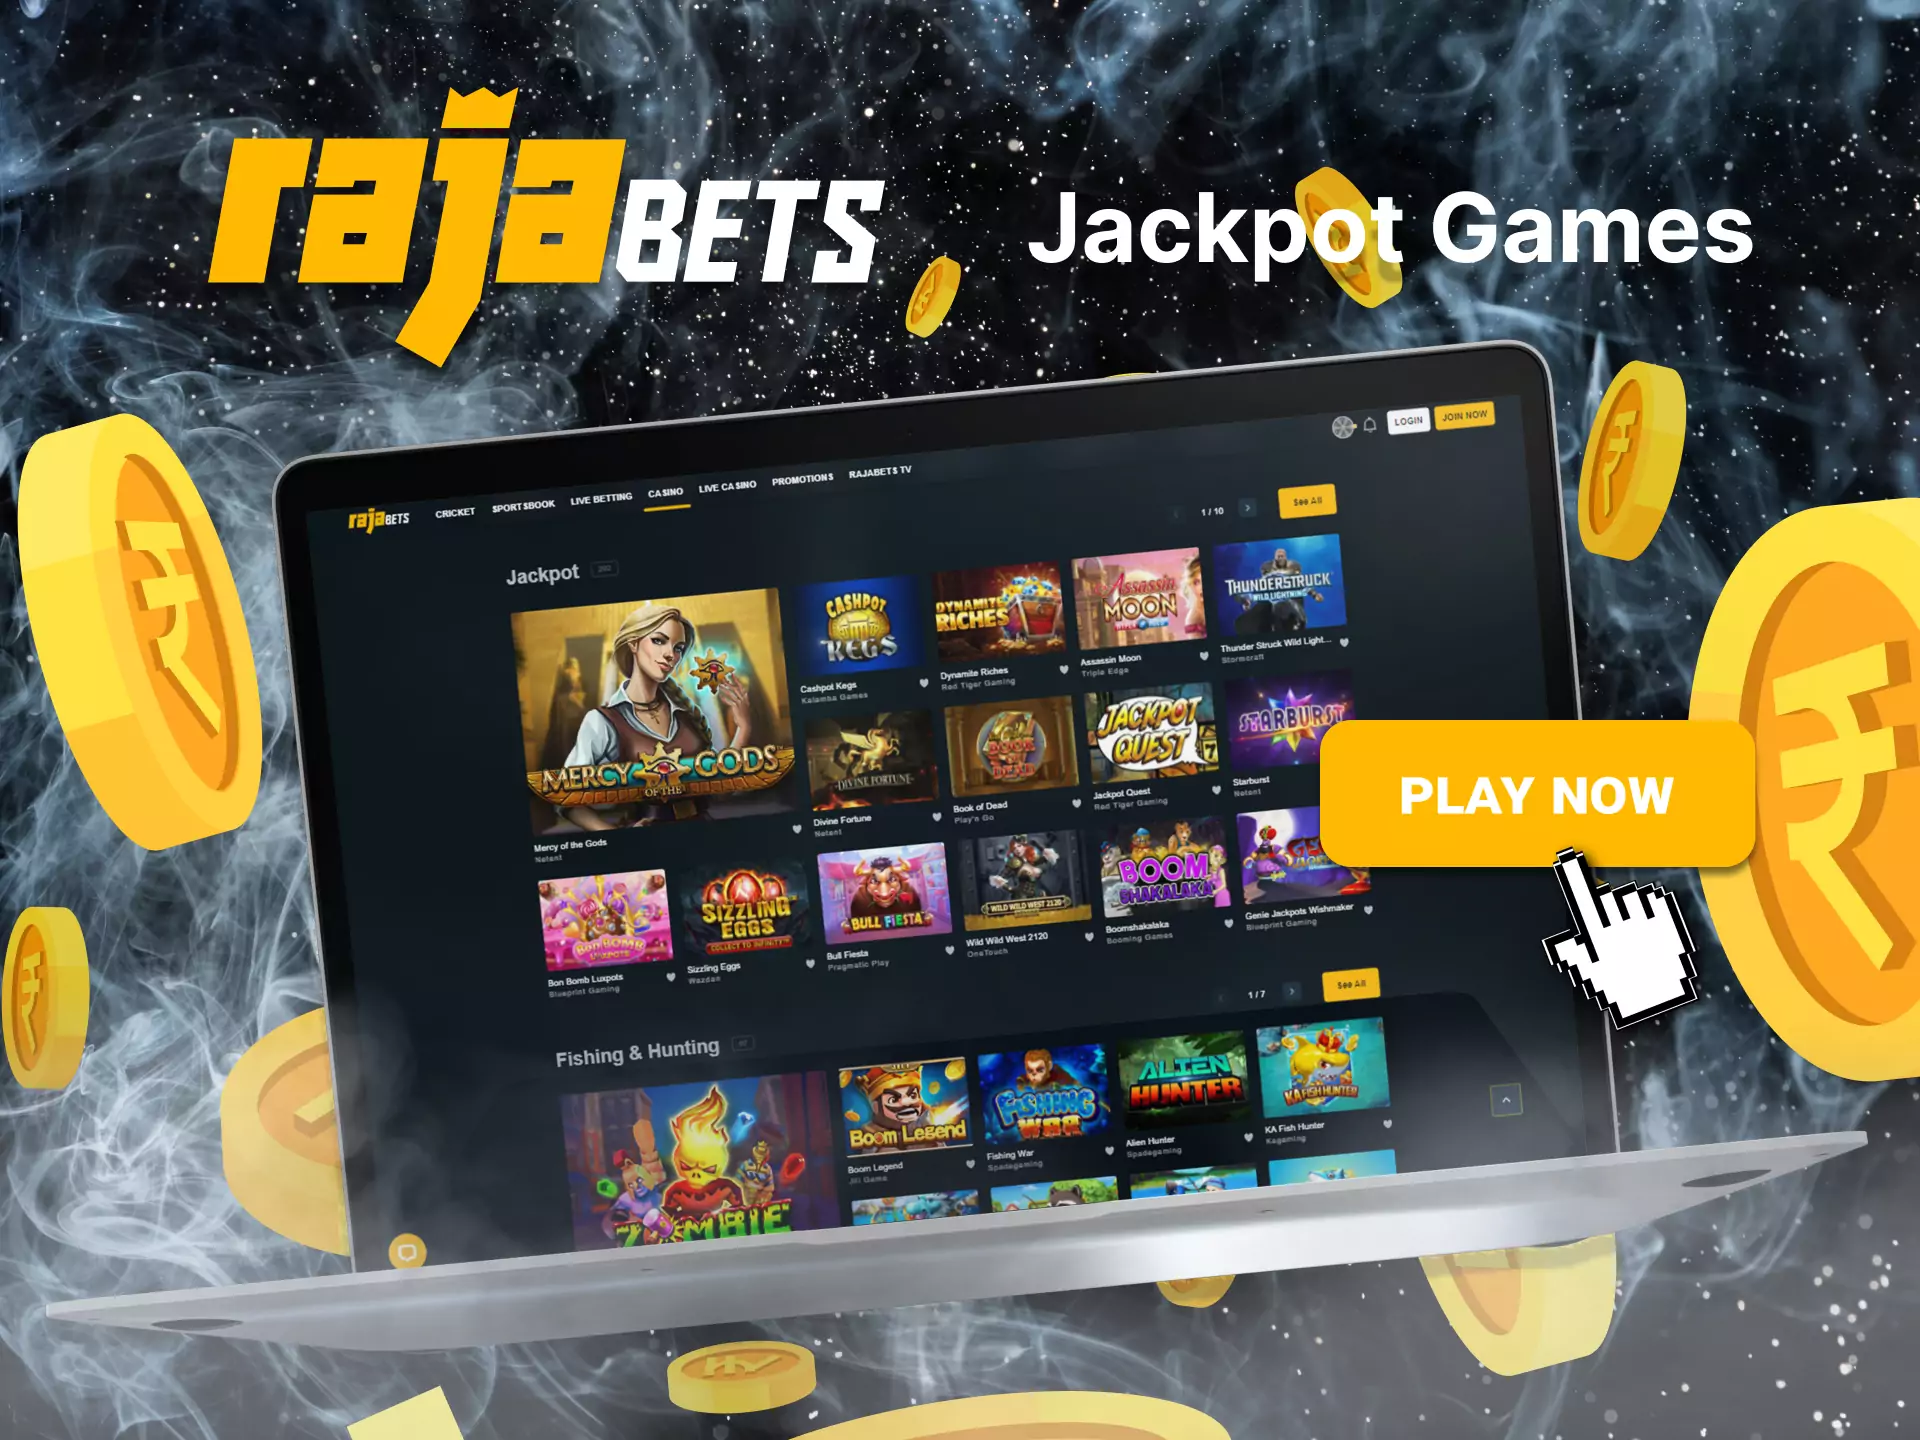 Try different jackpot games in Rajabets.